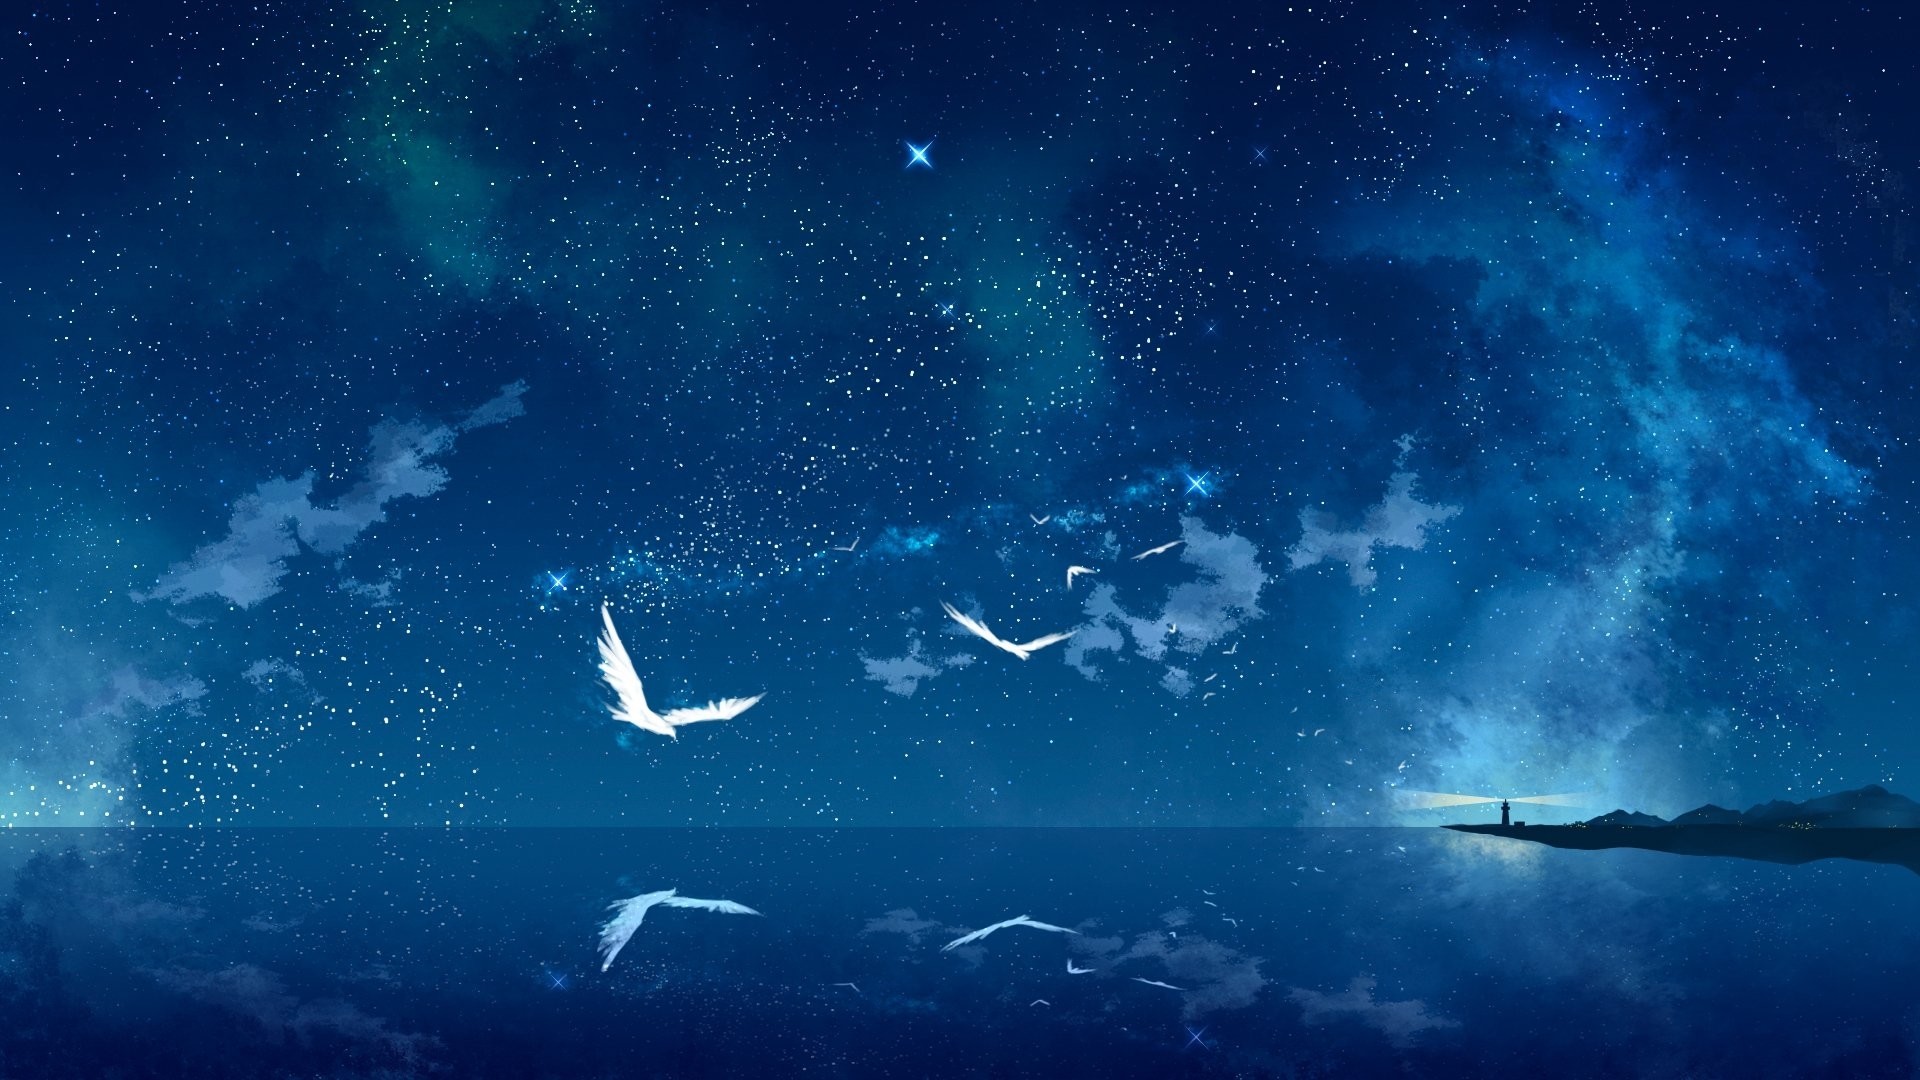 1920x1080 Title : 357 starry sky hd wallpapers | background images – wallpaper abyss.  Dimension : 1920 x 1080. File Type : JPG/JPEG